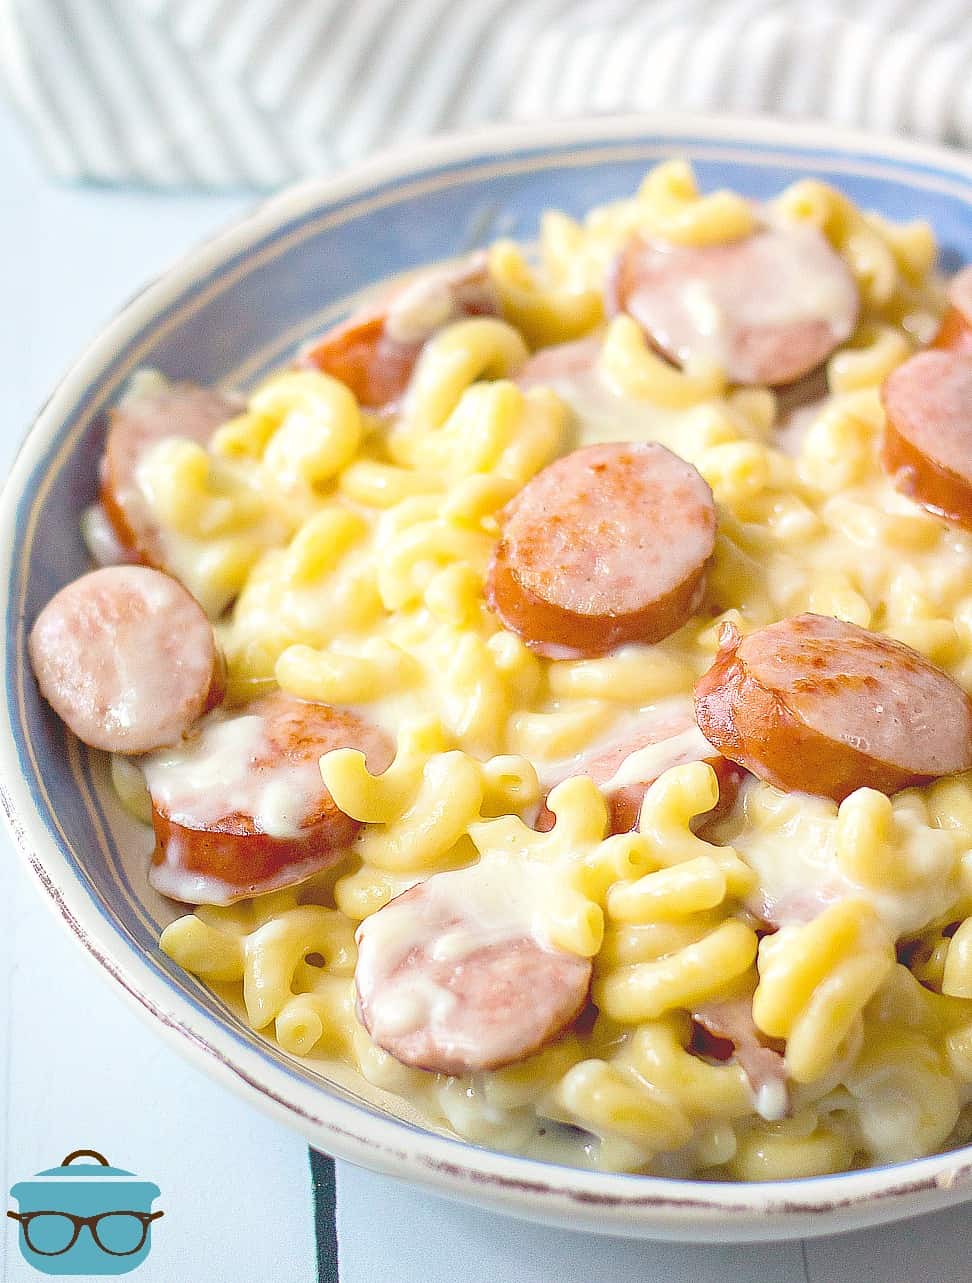 Sausage Macaroni and Cheese in a bowl with a dish towel on the side.